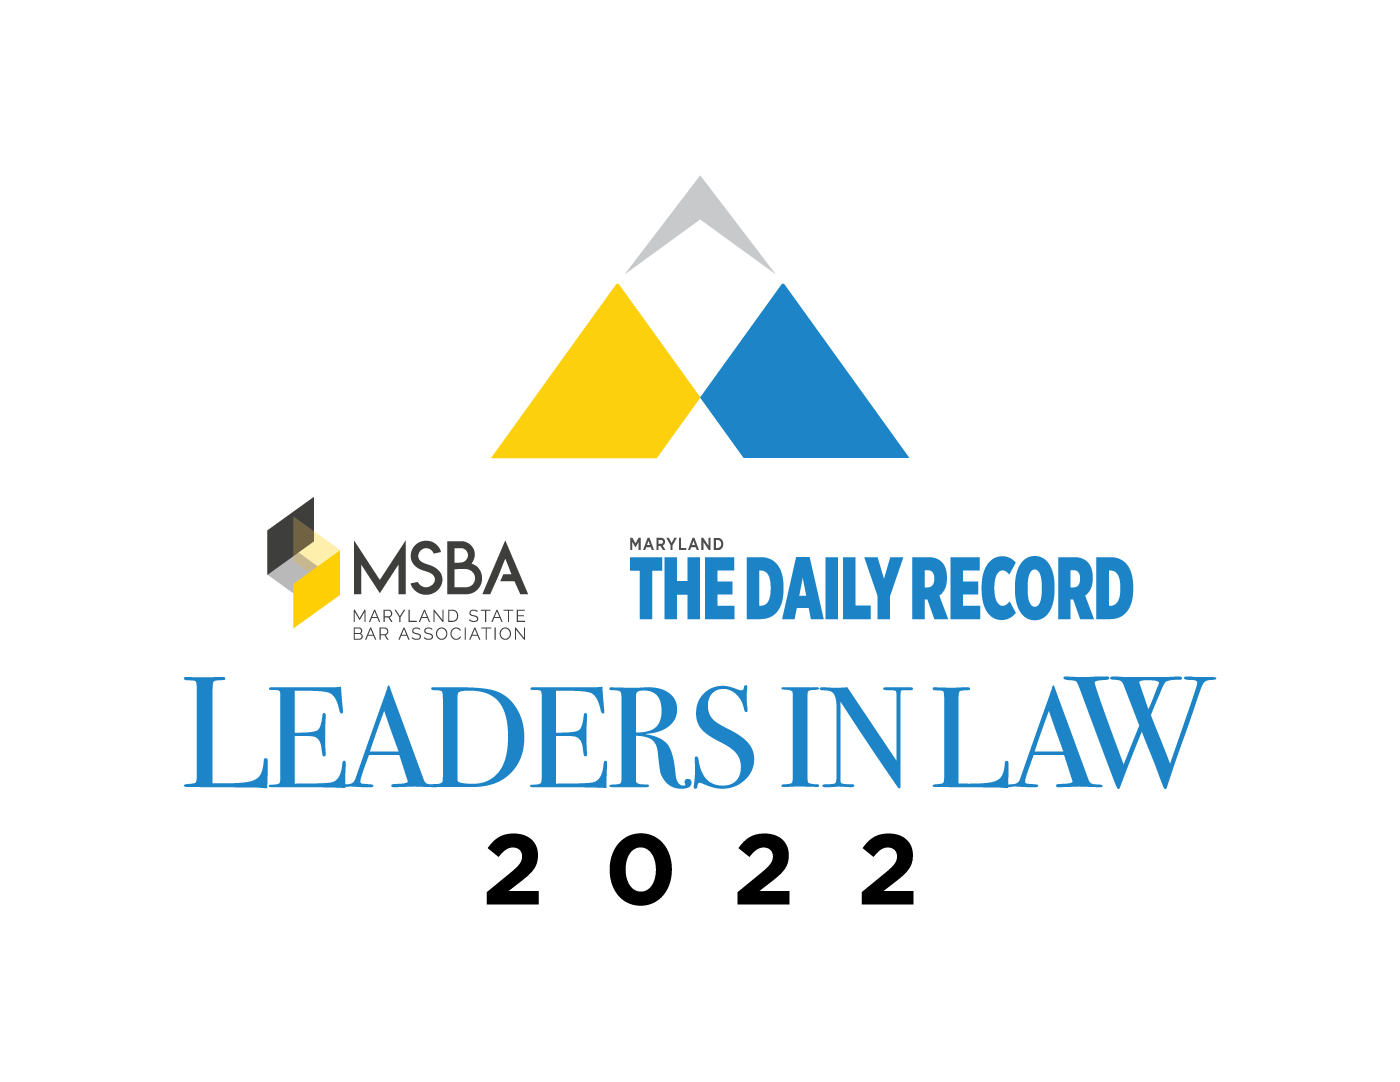 MSBA and The Daily Record, Leaders in Law 2022